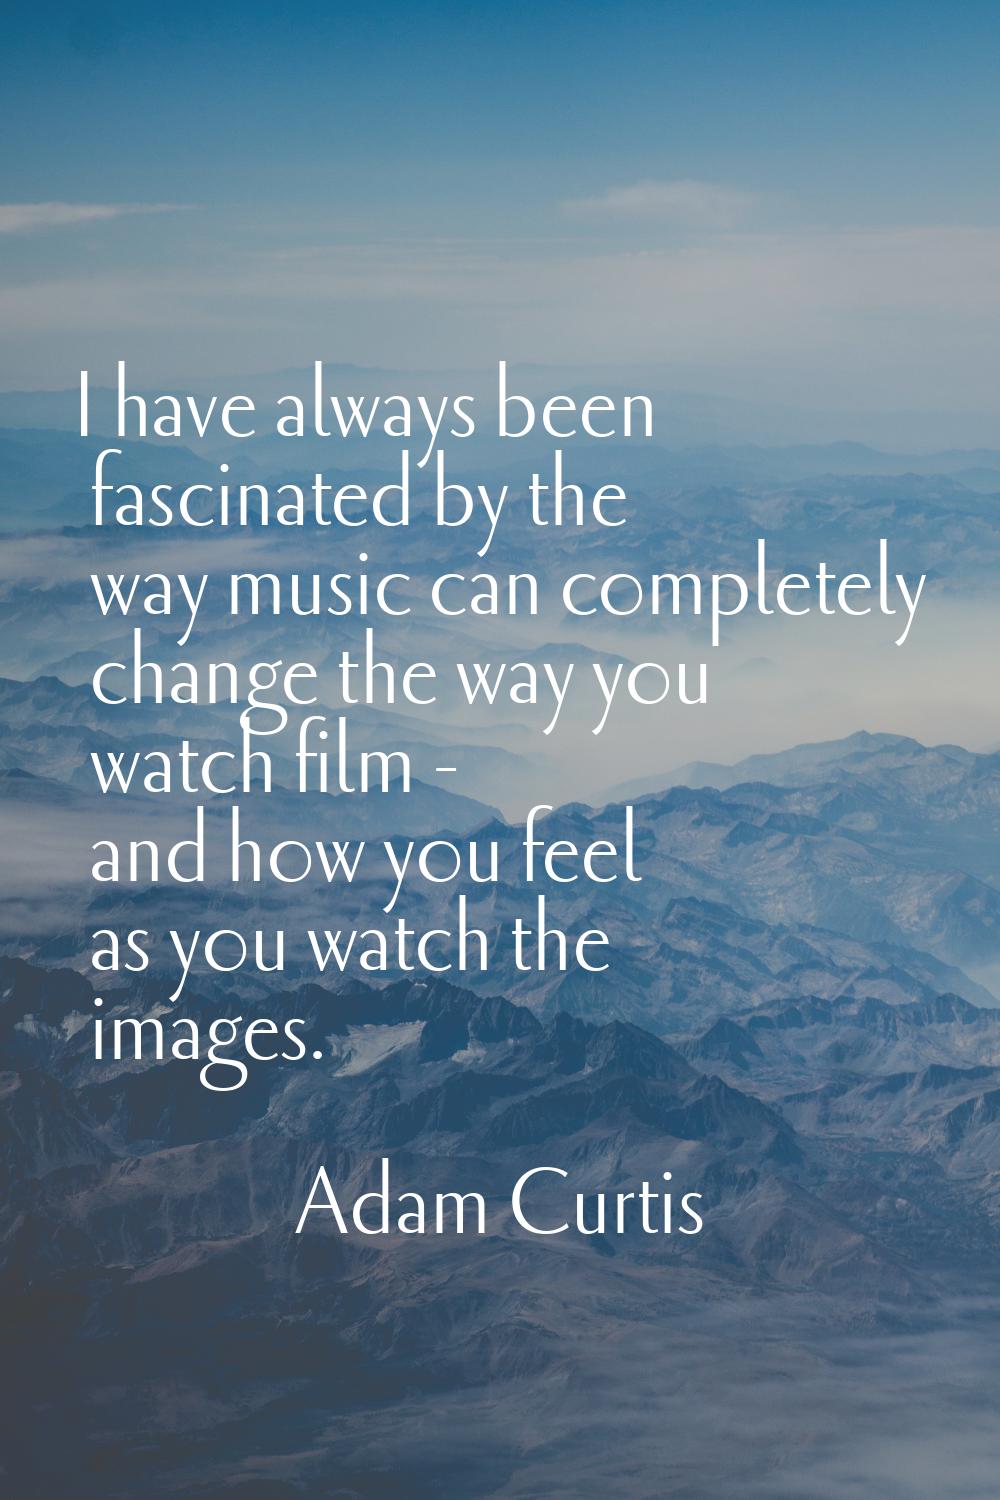 I have always been fascinated by the way music can completely change the way you watch film - and h